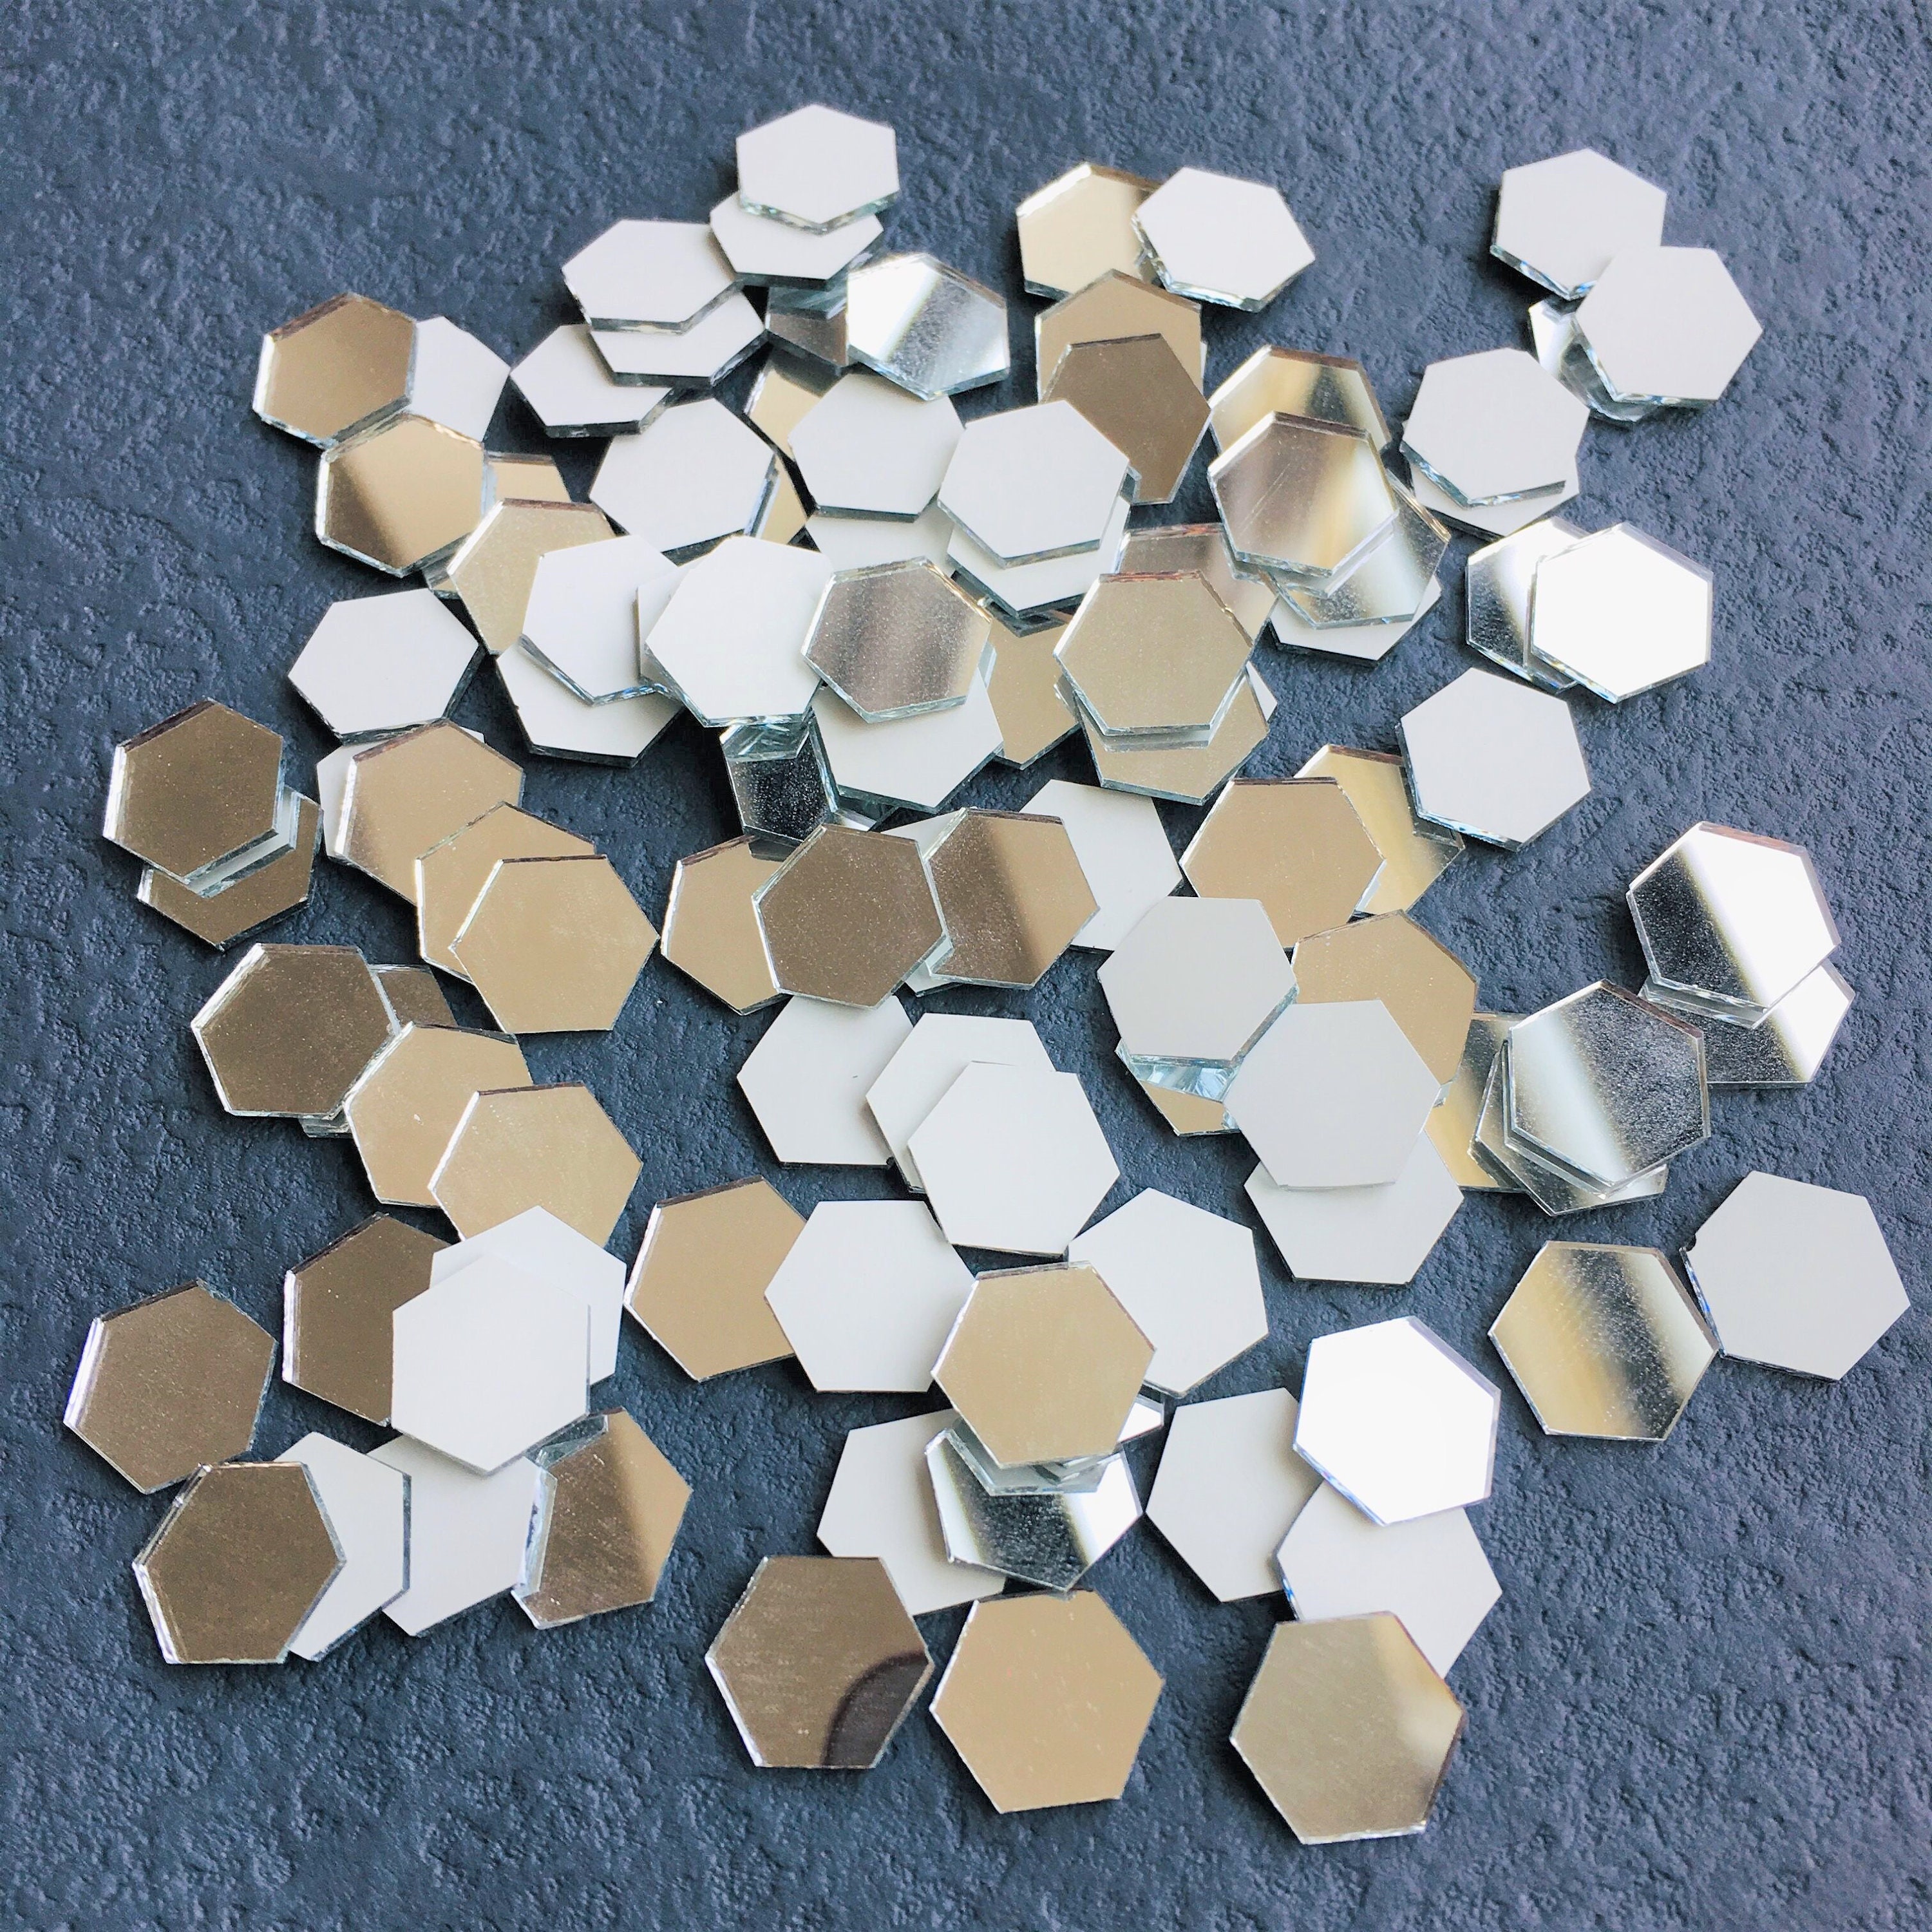 150 Pieces Small Square Mirrors for Crafts, Glass Tiles for Centerpieces,  DIY Decorations (3 Sizes) 